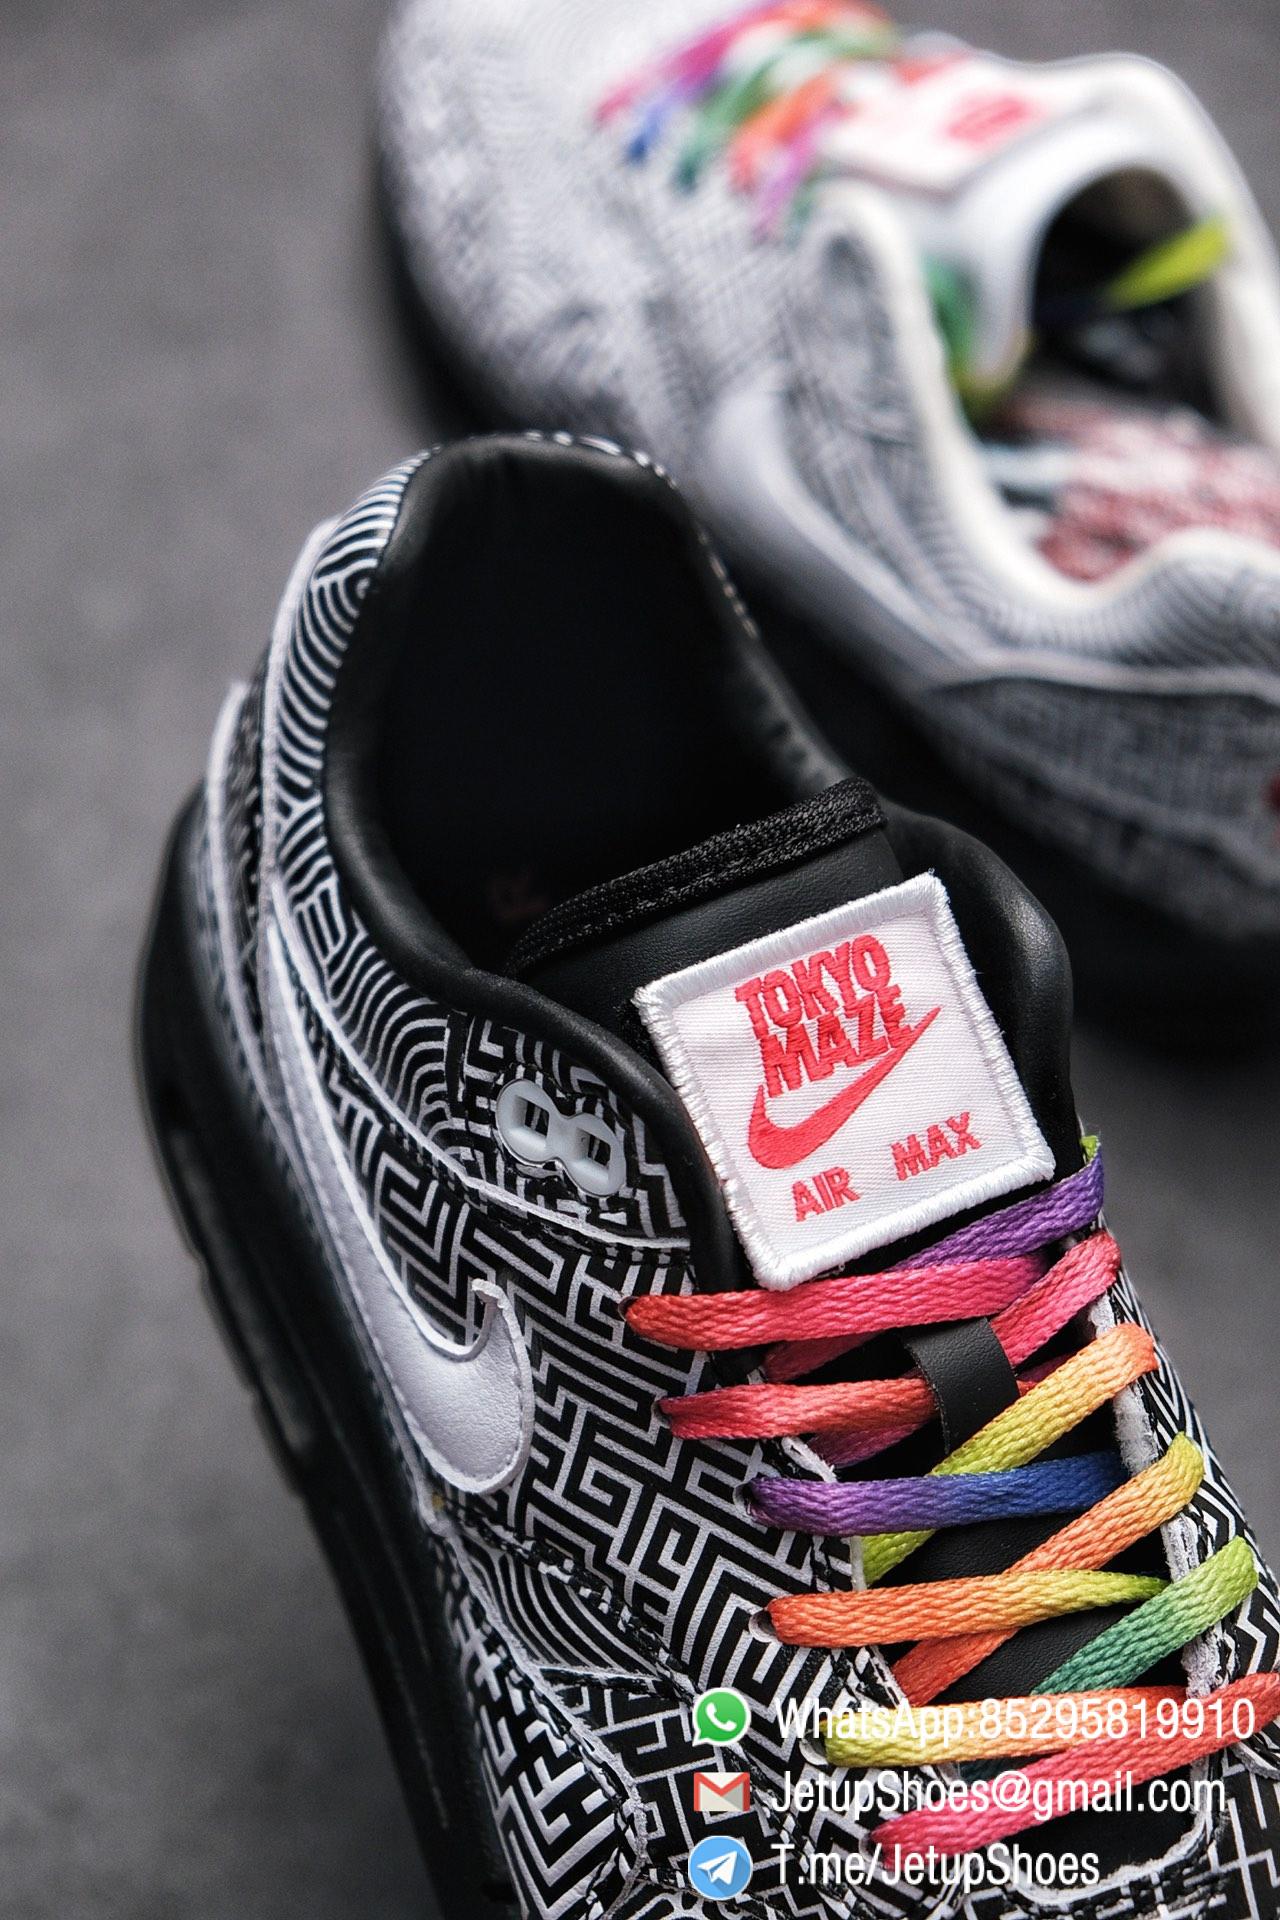 Best Replica Sneakers Nike Air Max 1 On Air Tokyo Maze Monochromatic Labyrinth Leather Upper Rainbow Colored Laces 05